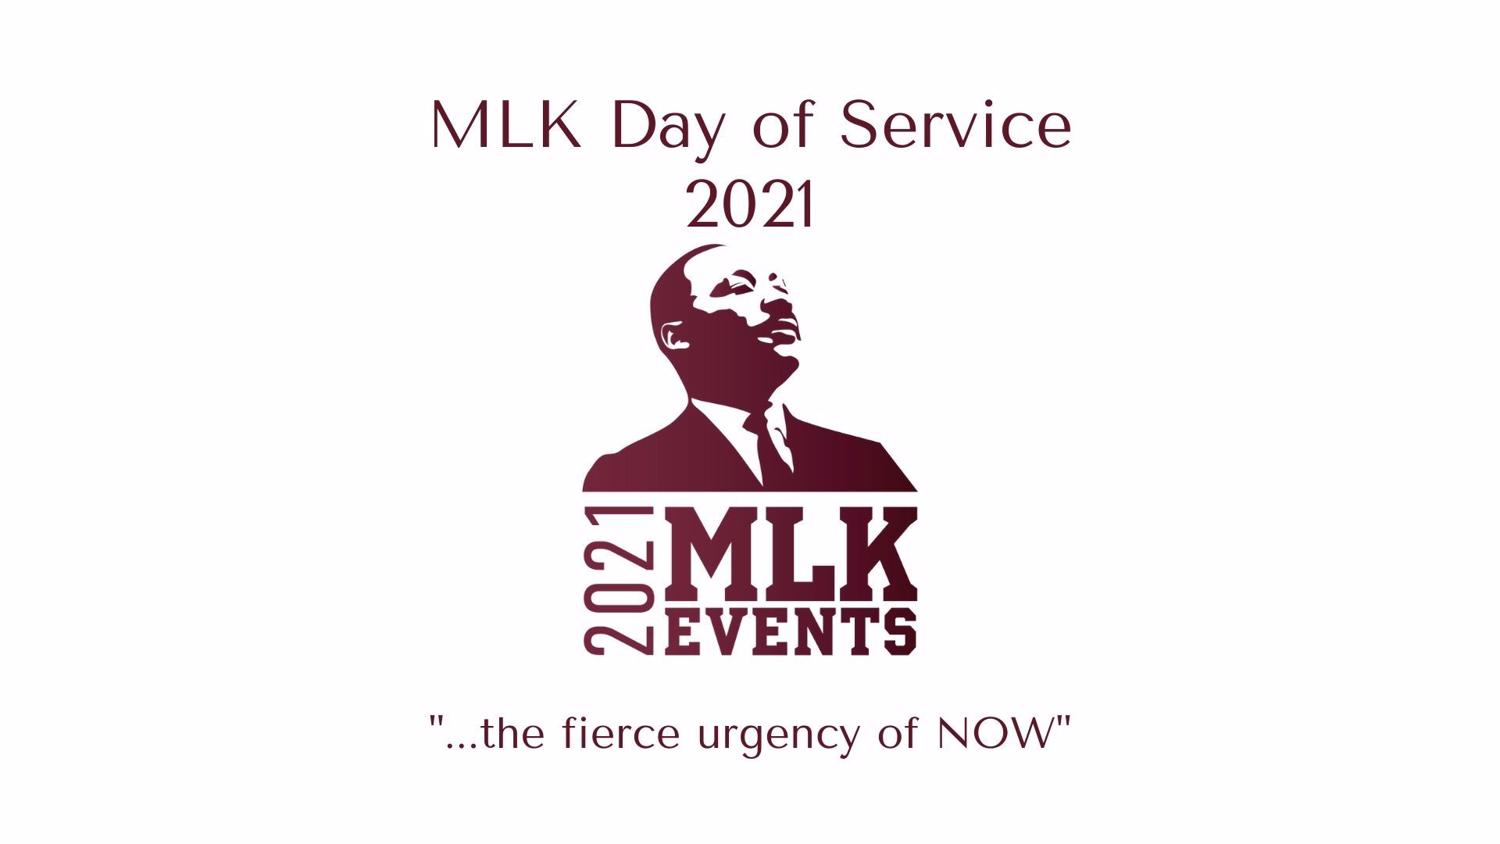 Maroon and white graphic of Martin Luther King Jr.